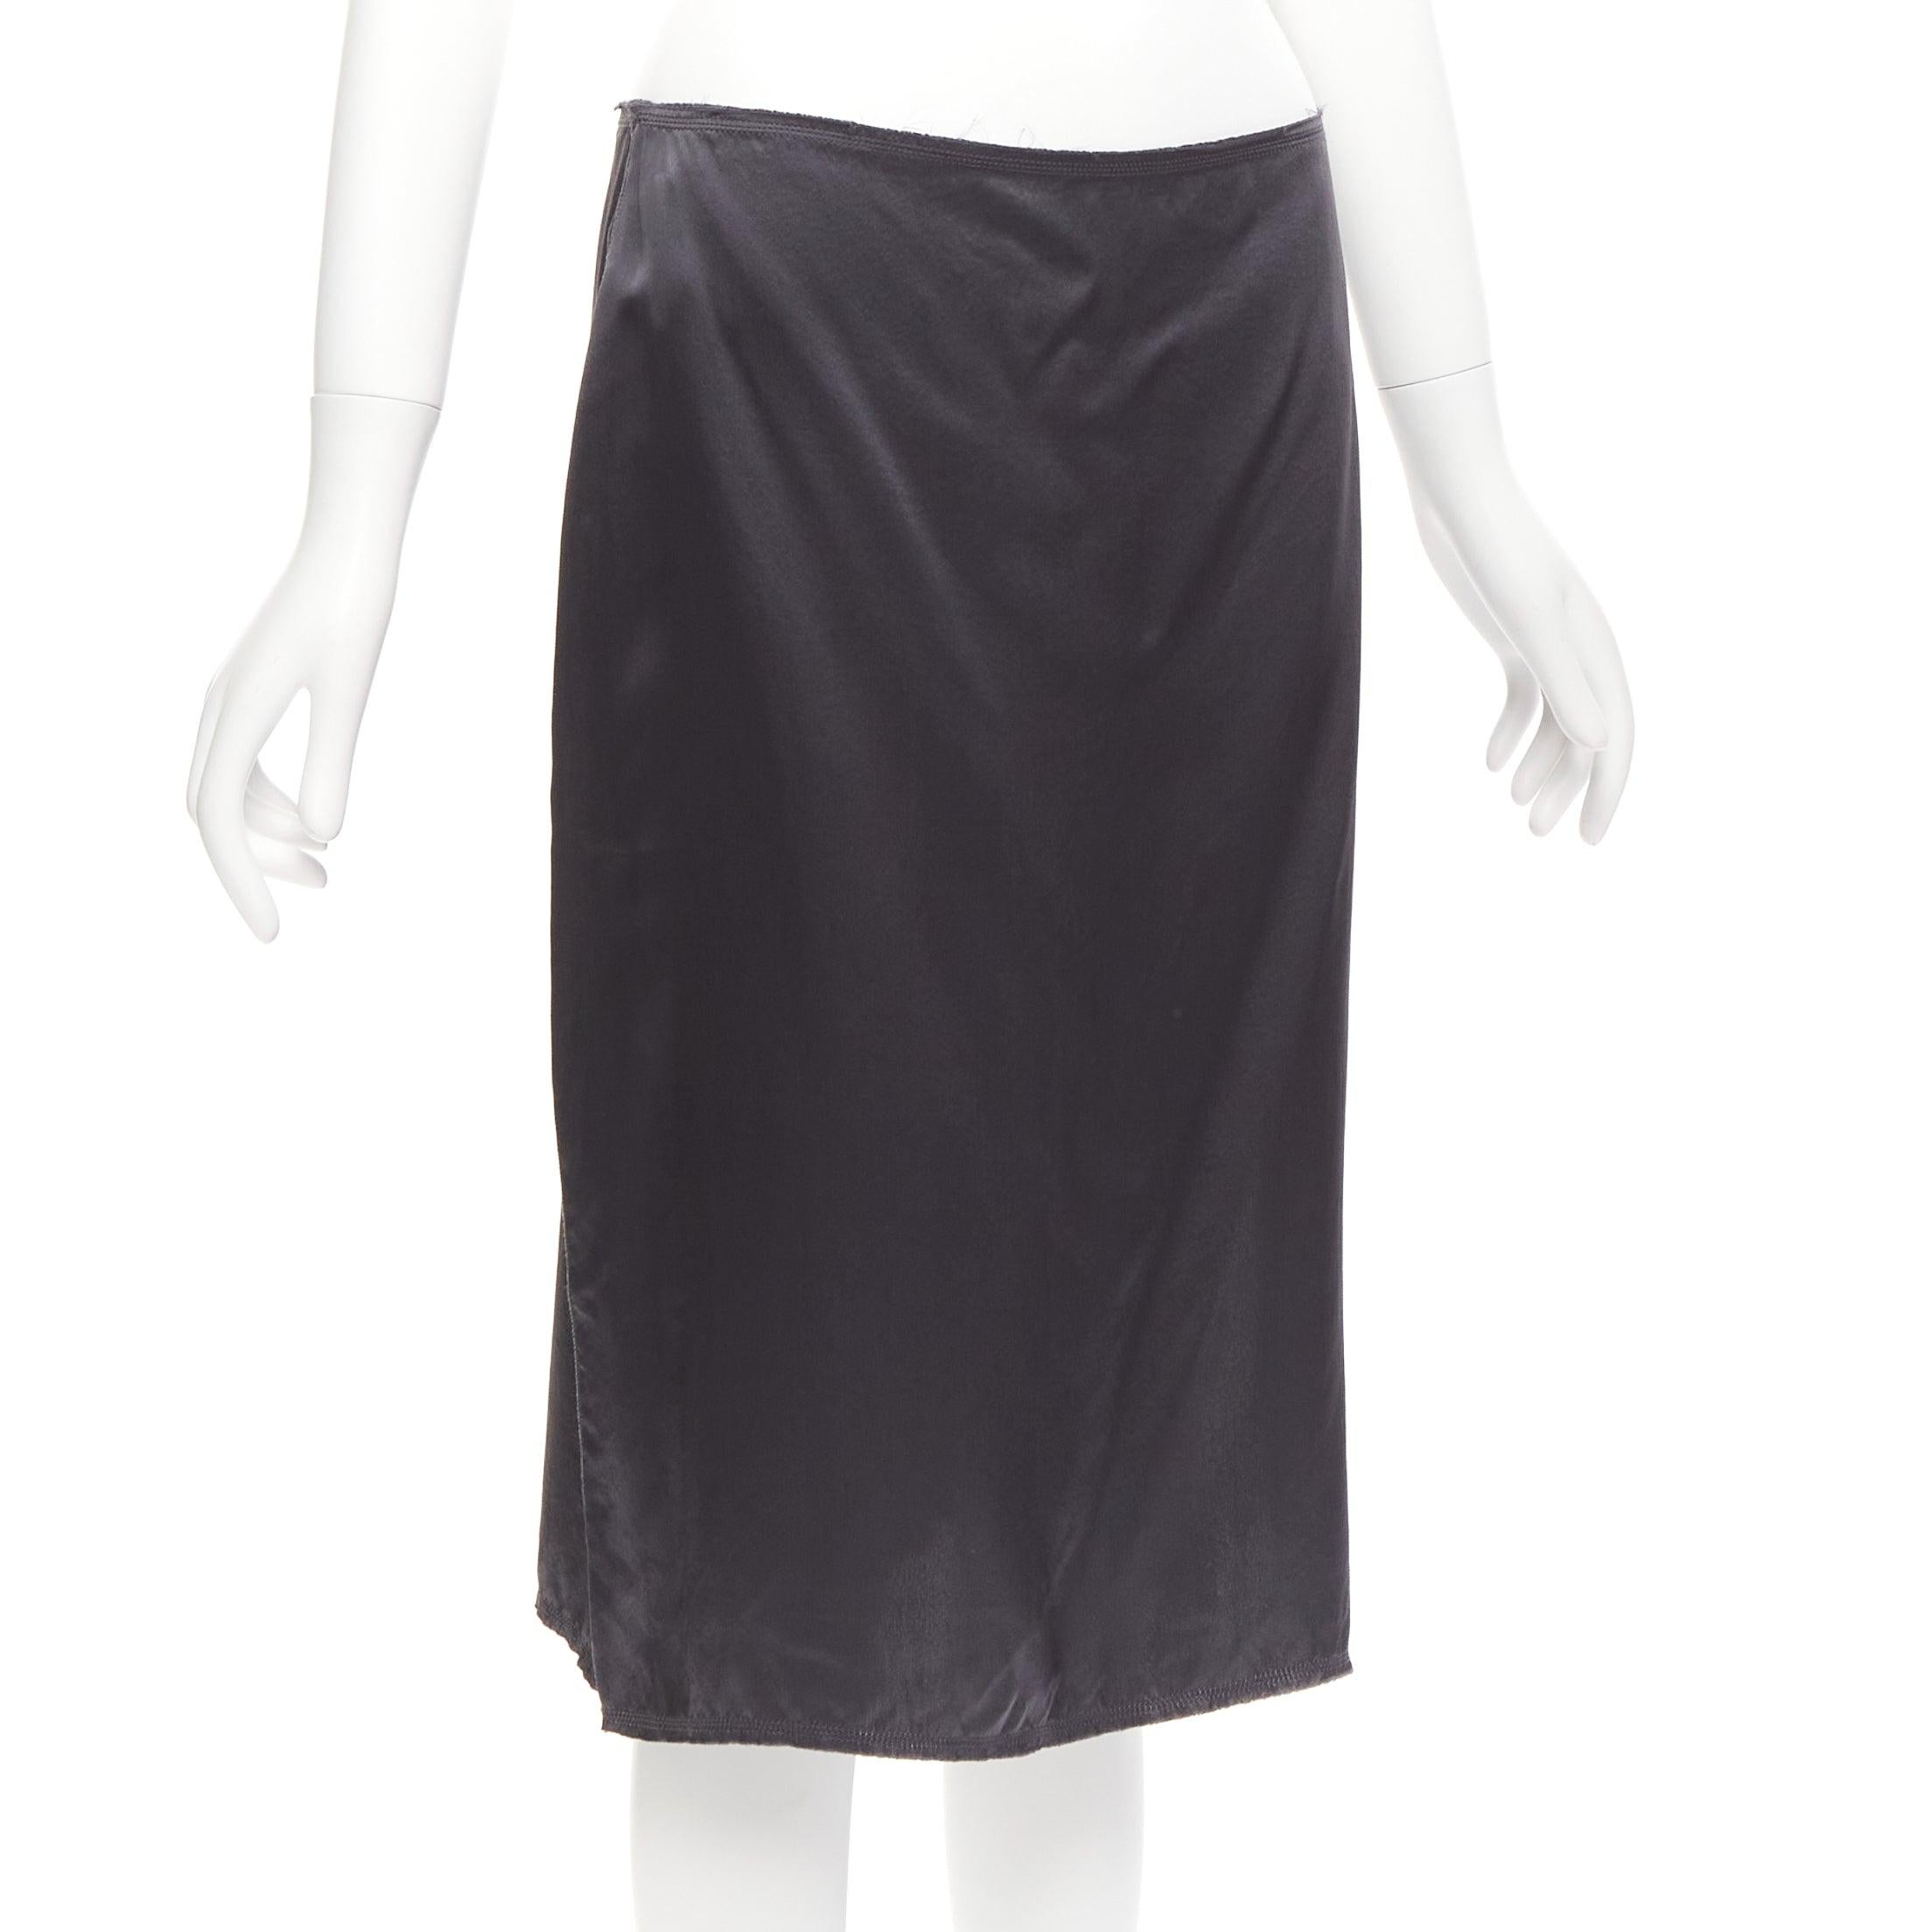 LANVIN 2004 100% silk raw edge fabric button low waist midi skirt FR38 M
Reference: CELG/A00266
Brand: Lanvin
Designer: Alber Elbaz
Collection: 2004
Material: Silk
Color: Black
Pattern: Solid
Closure: Button
Extra Details: Side slit and side fabric